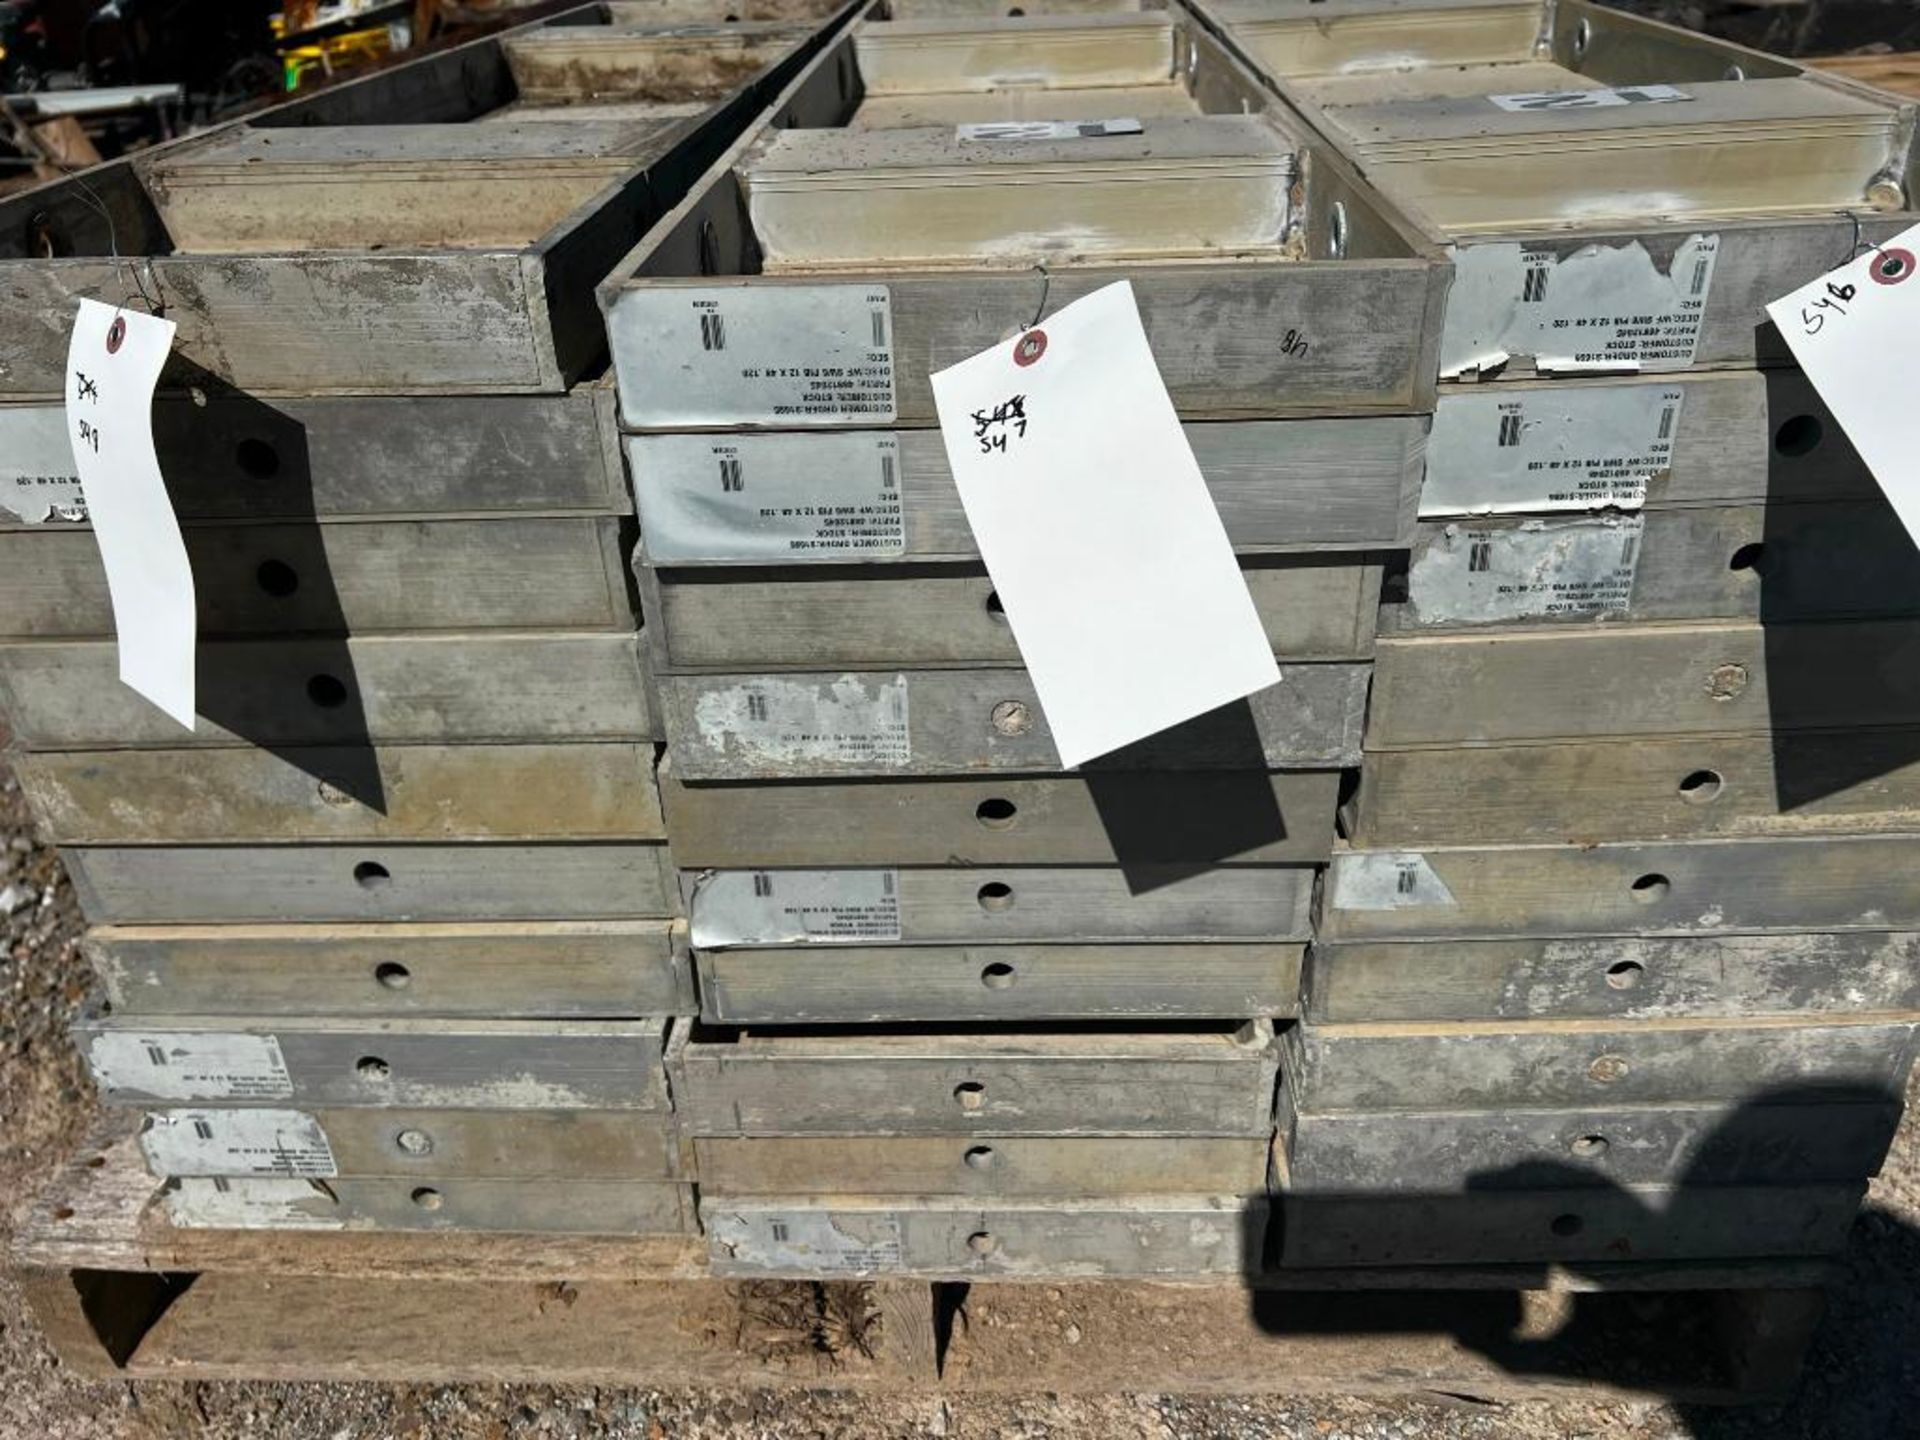 (10) 12" x 4' Western Smooth Aluminum Concrete Forms